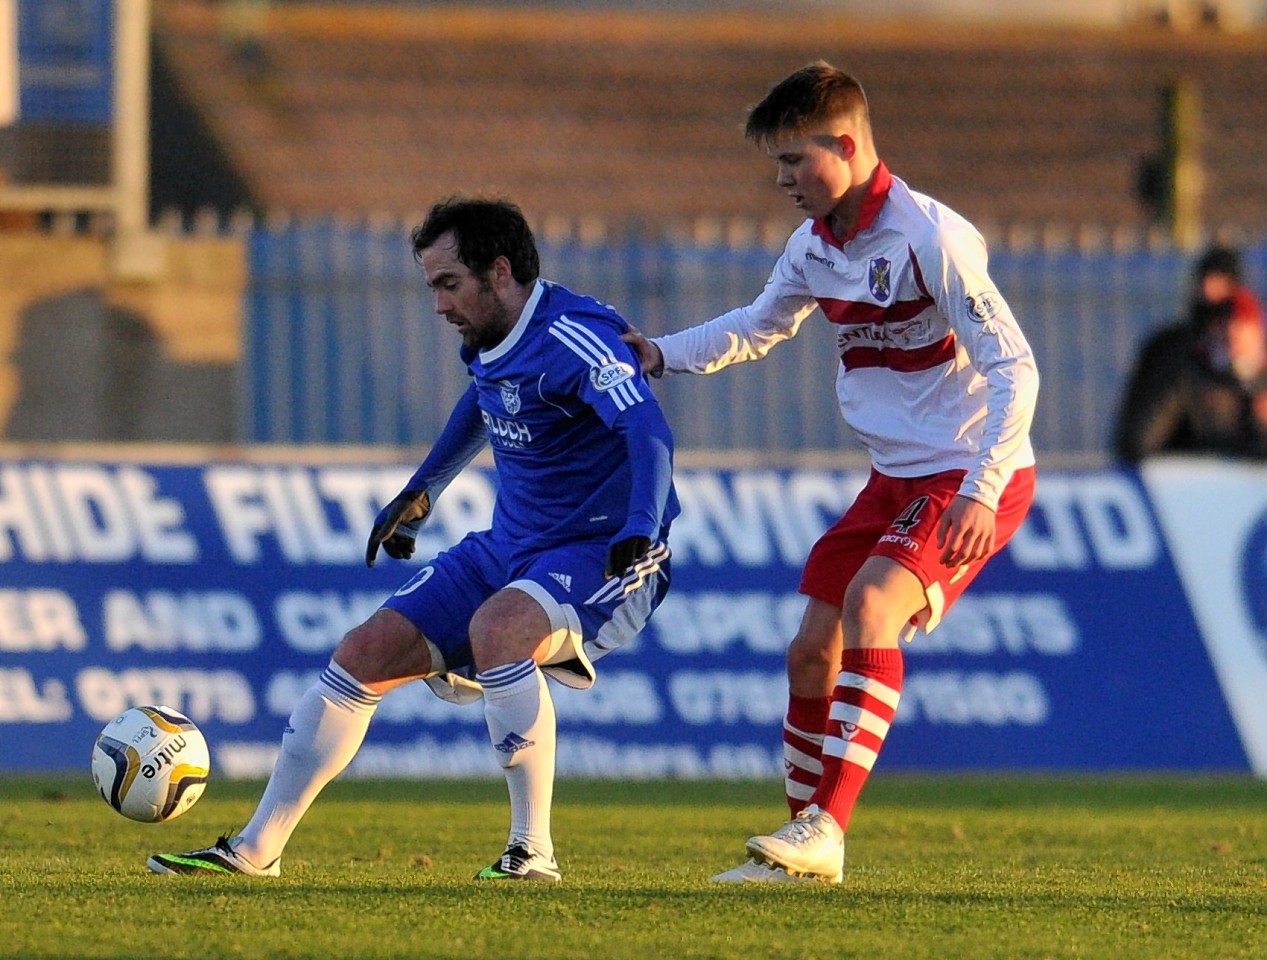 Jamie Stevenson is aiming for promotion with Peterhead